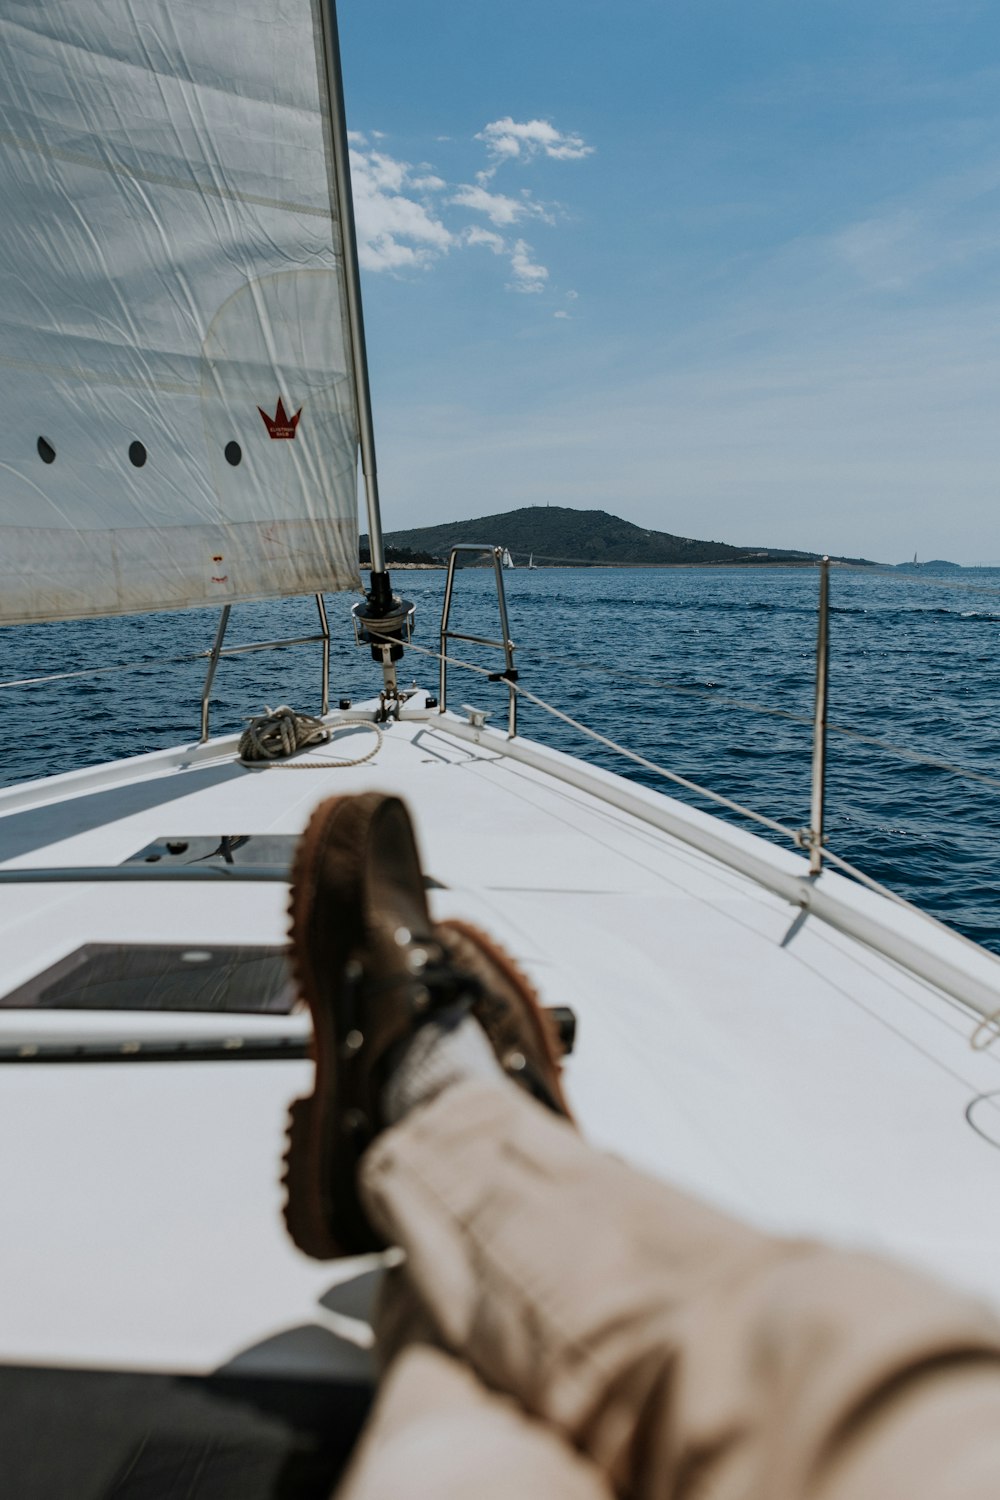 a person's feet on a sailboat in the water